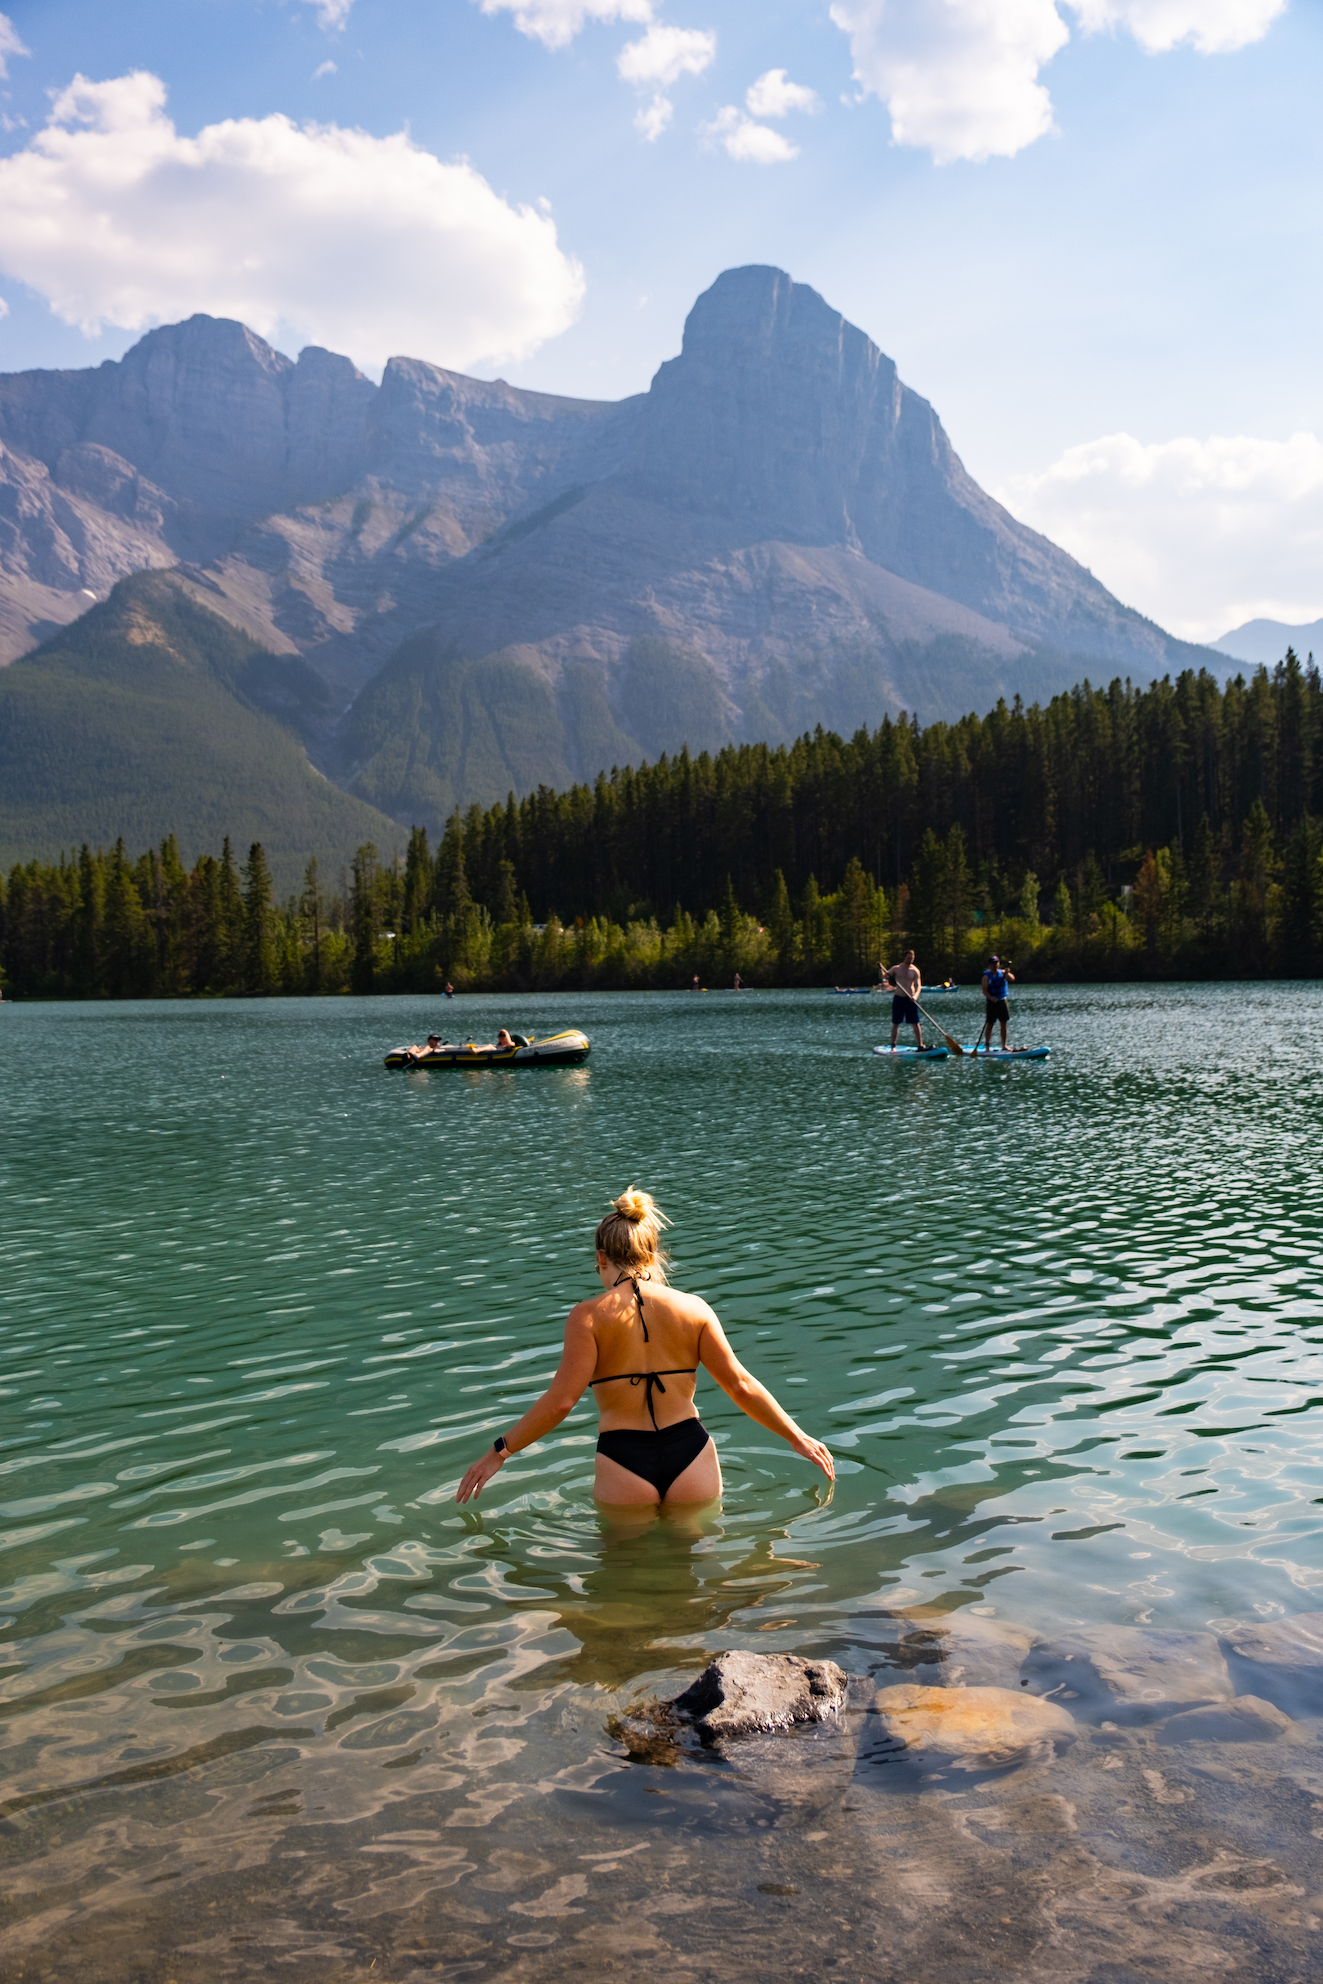 Can You Swim in Rundle Forebay Reservoir?